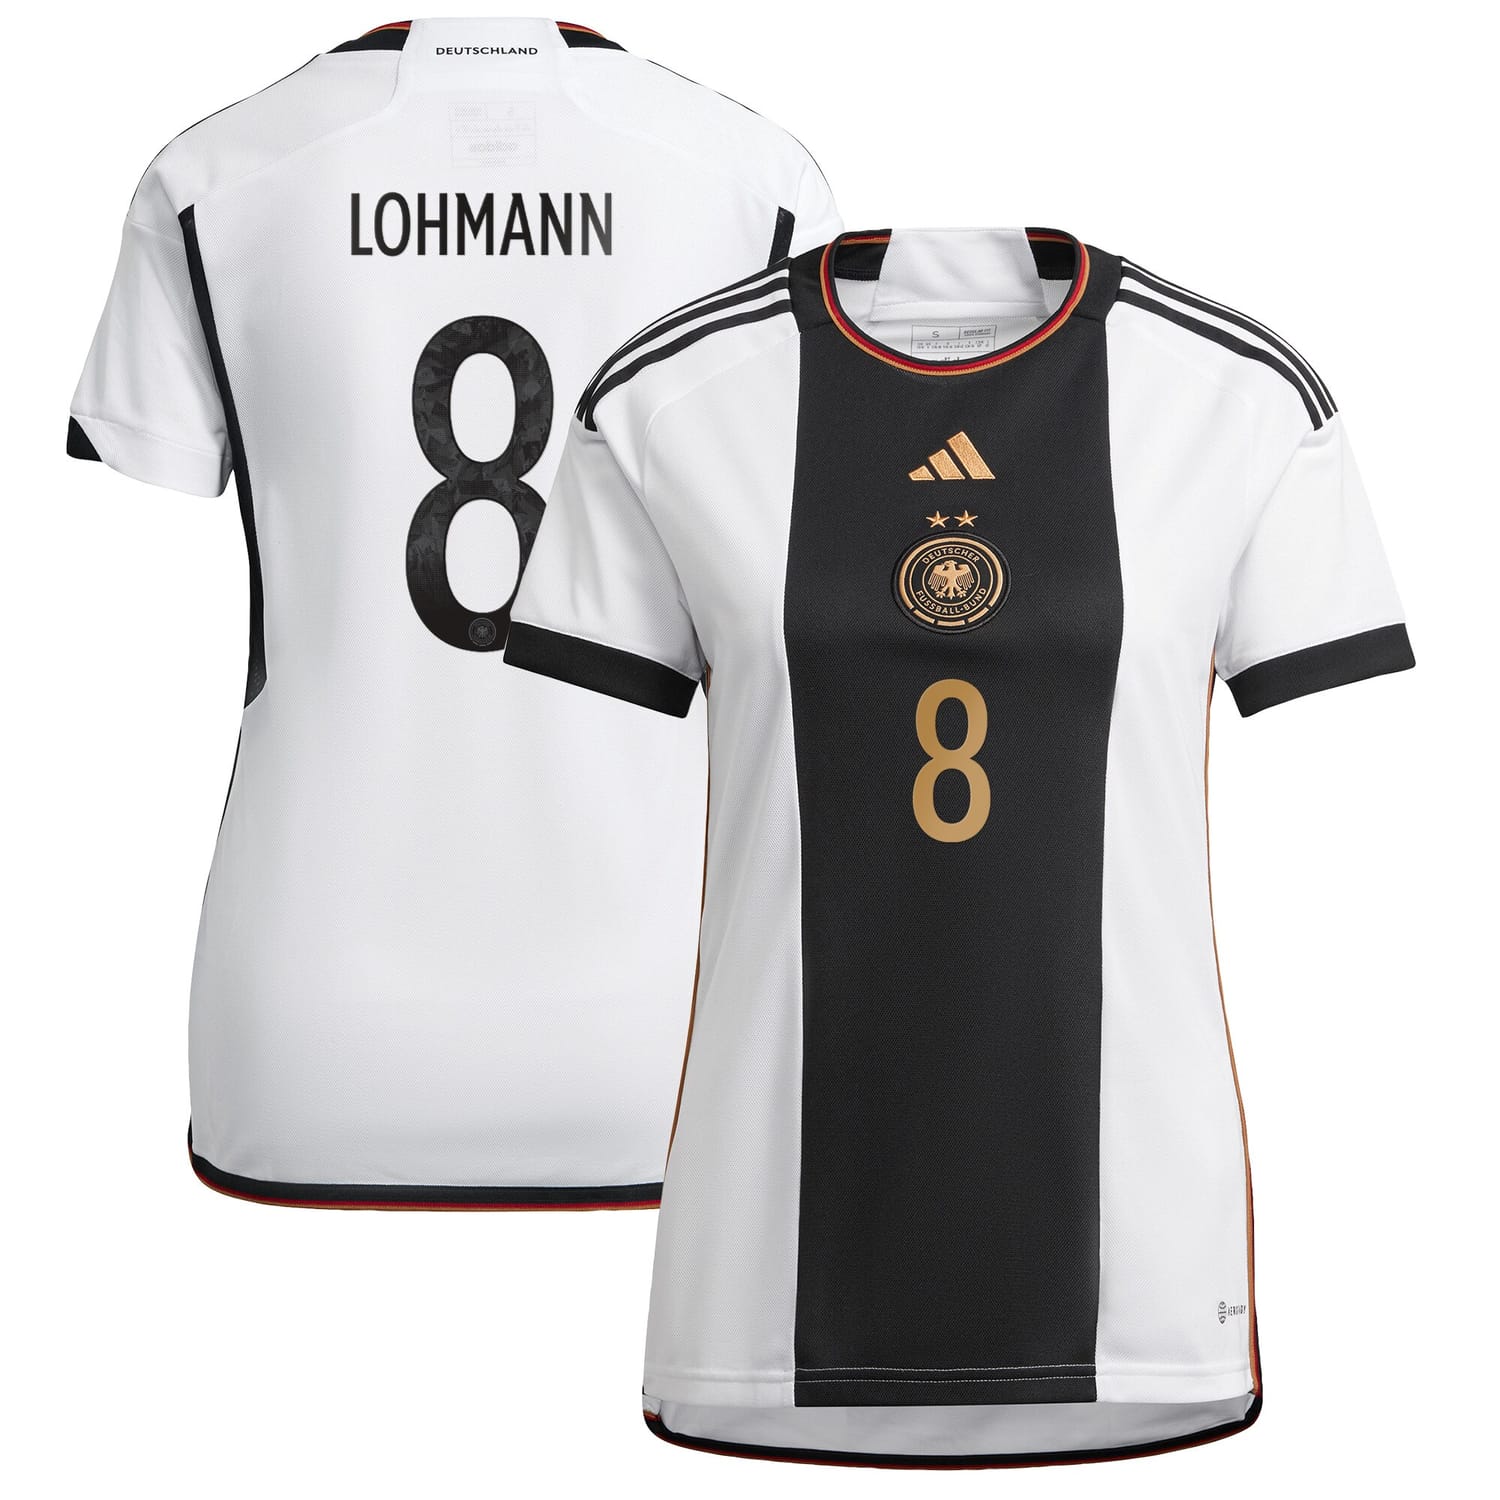 Germany National Team Home Jersey Shirt player Sydney Lohmann 8 printing for Women